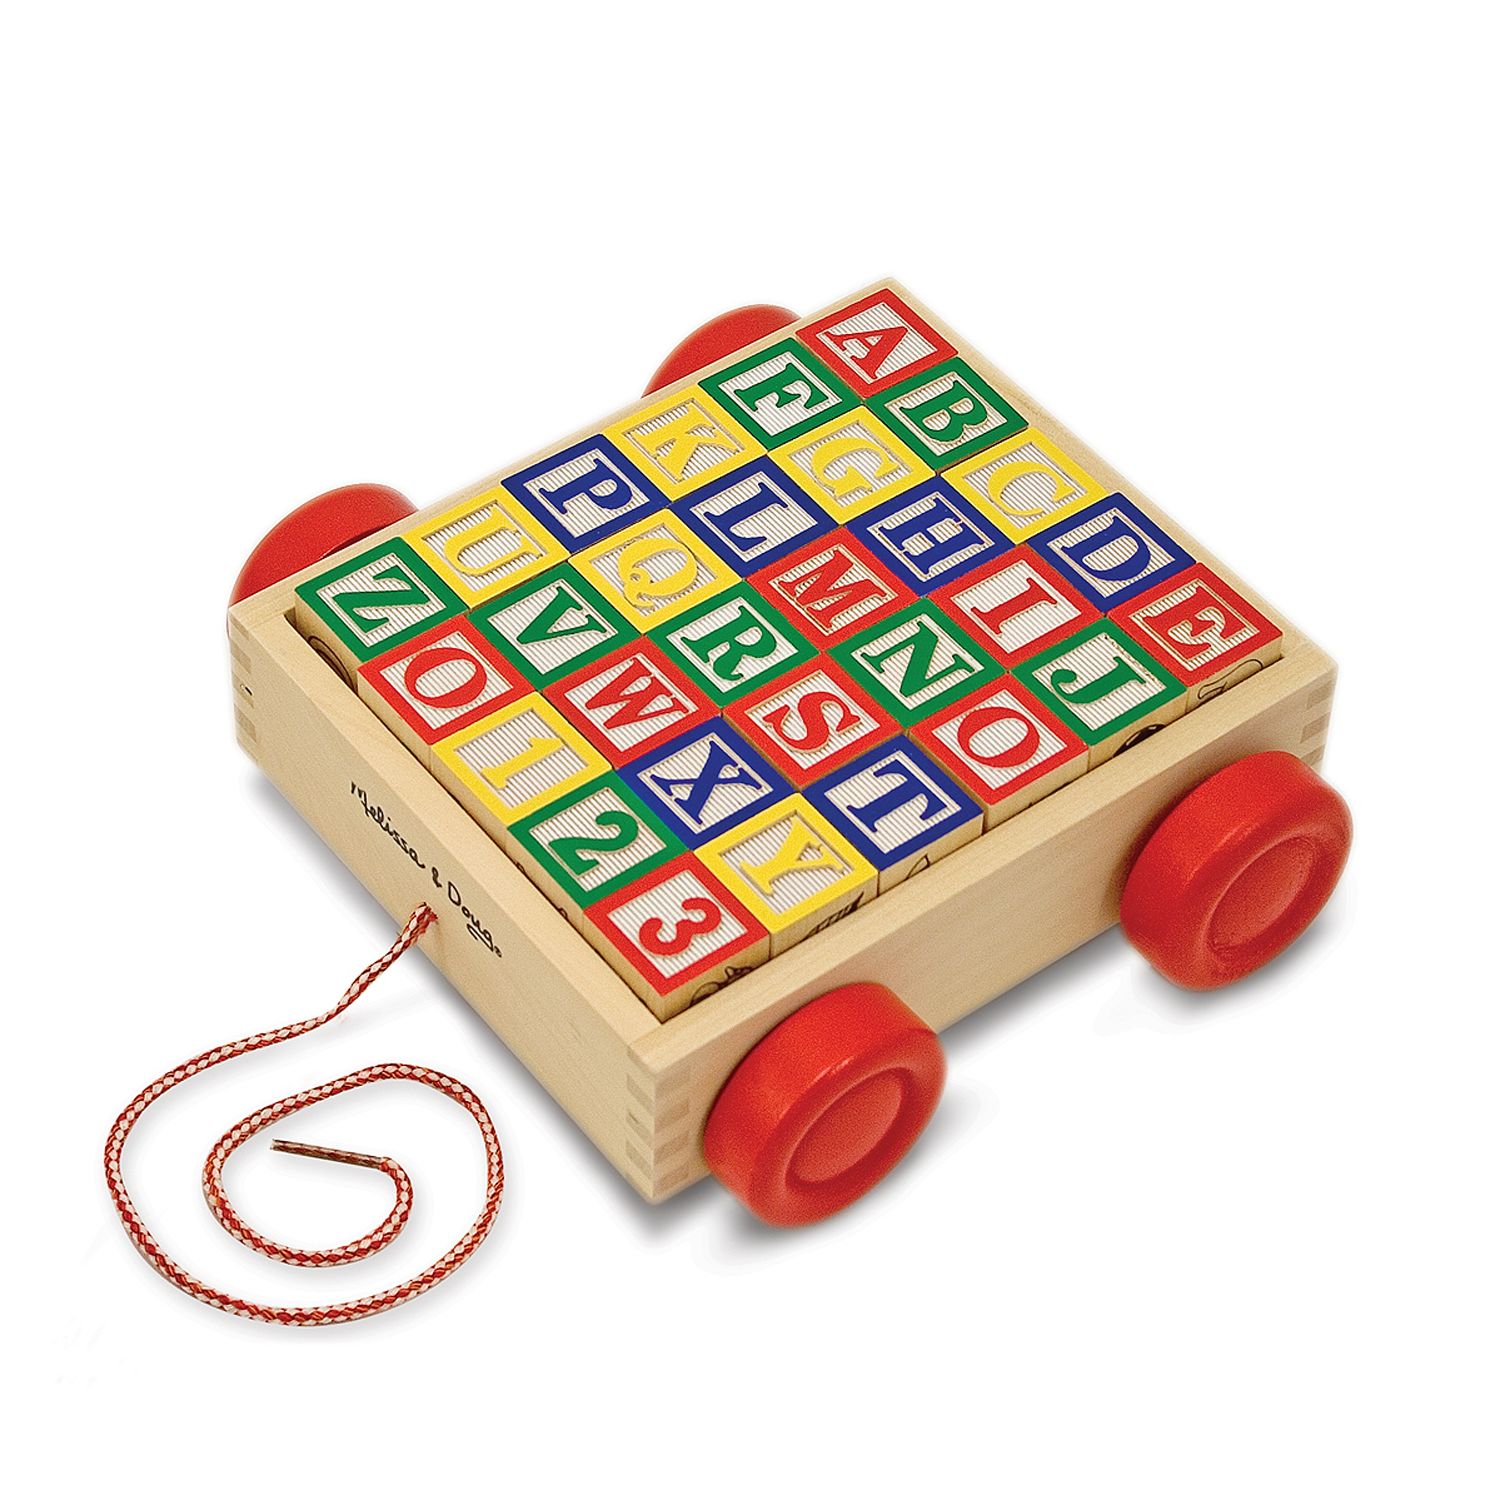 melissa & doug see & spell wooden educational toy